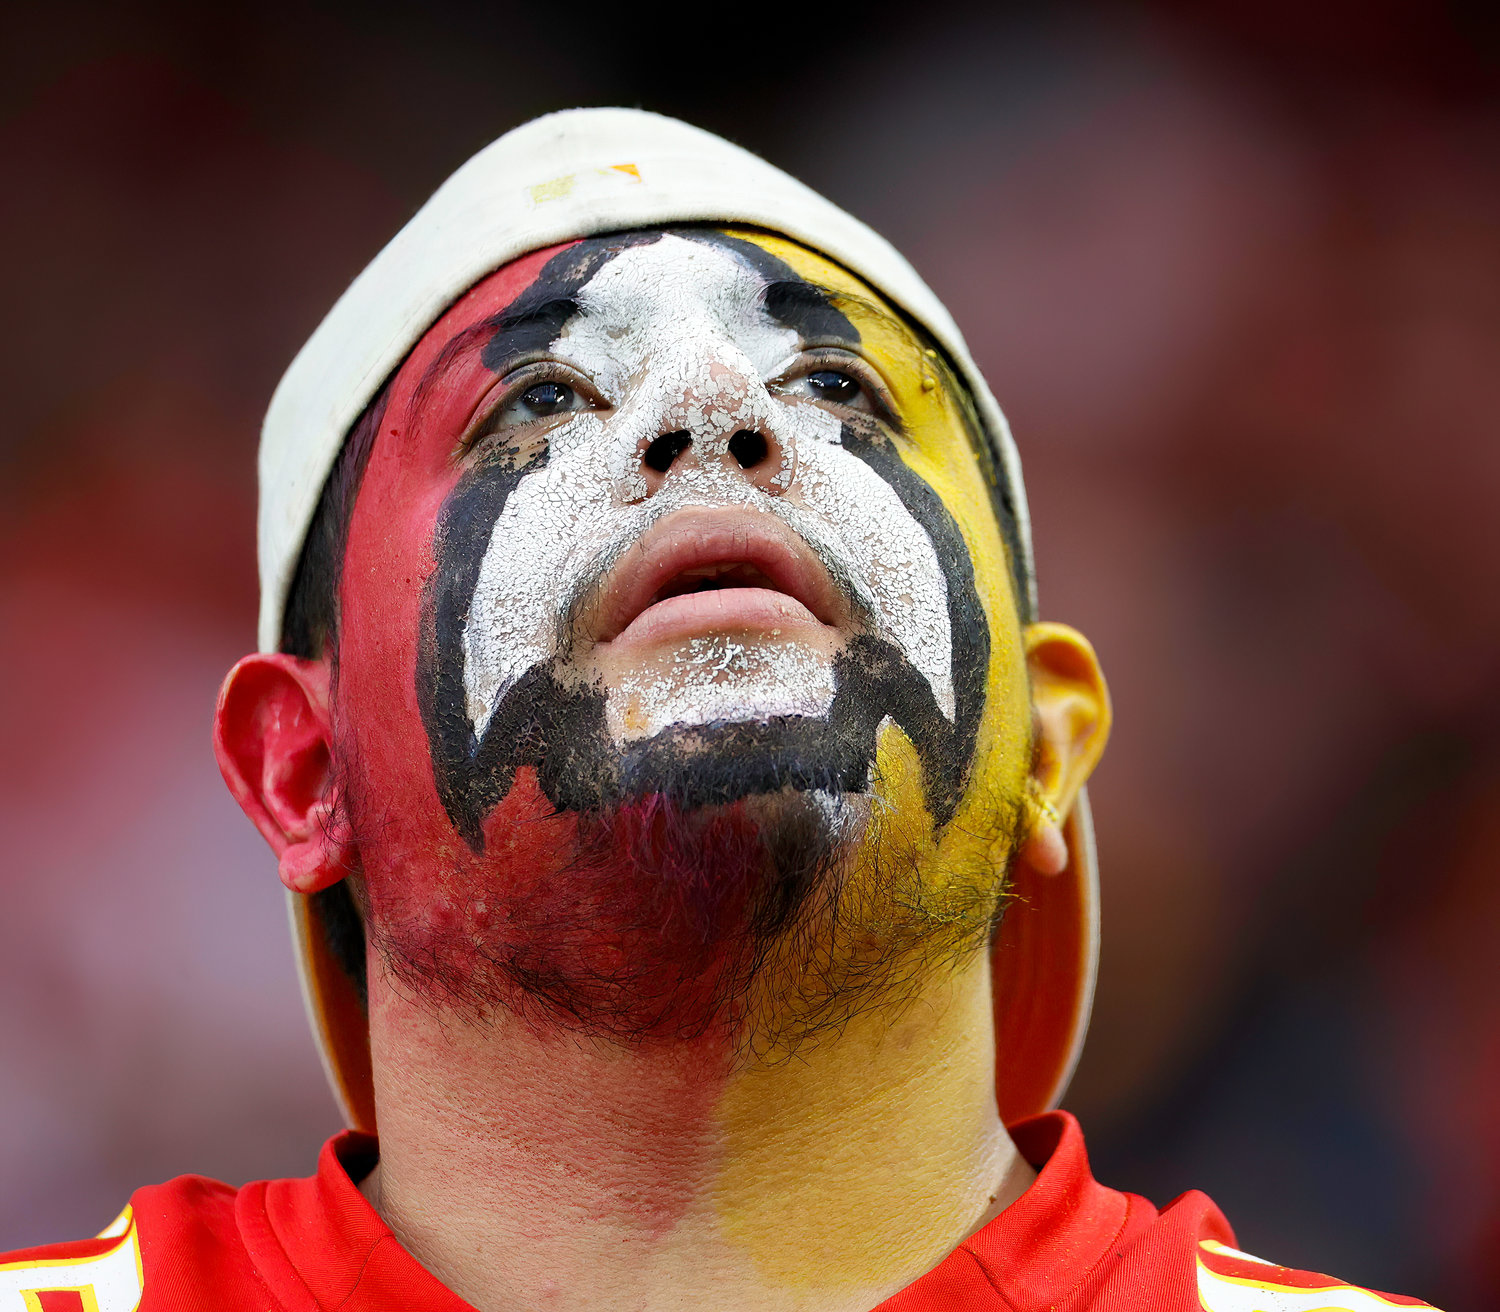 A Kansas City Chiefs fan during an NFL game between the Texans and the Chiefs on Dec. 18, 2022, in Houston. The Chiefs won, 30-24, in overtime.